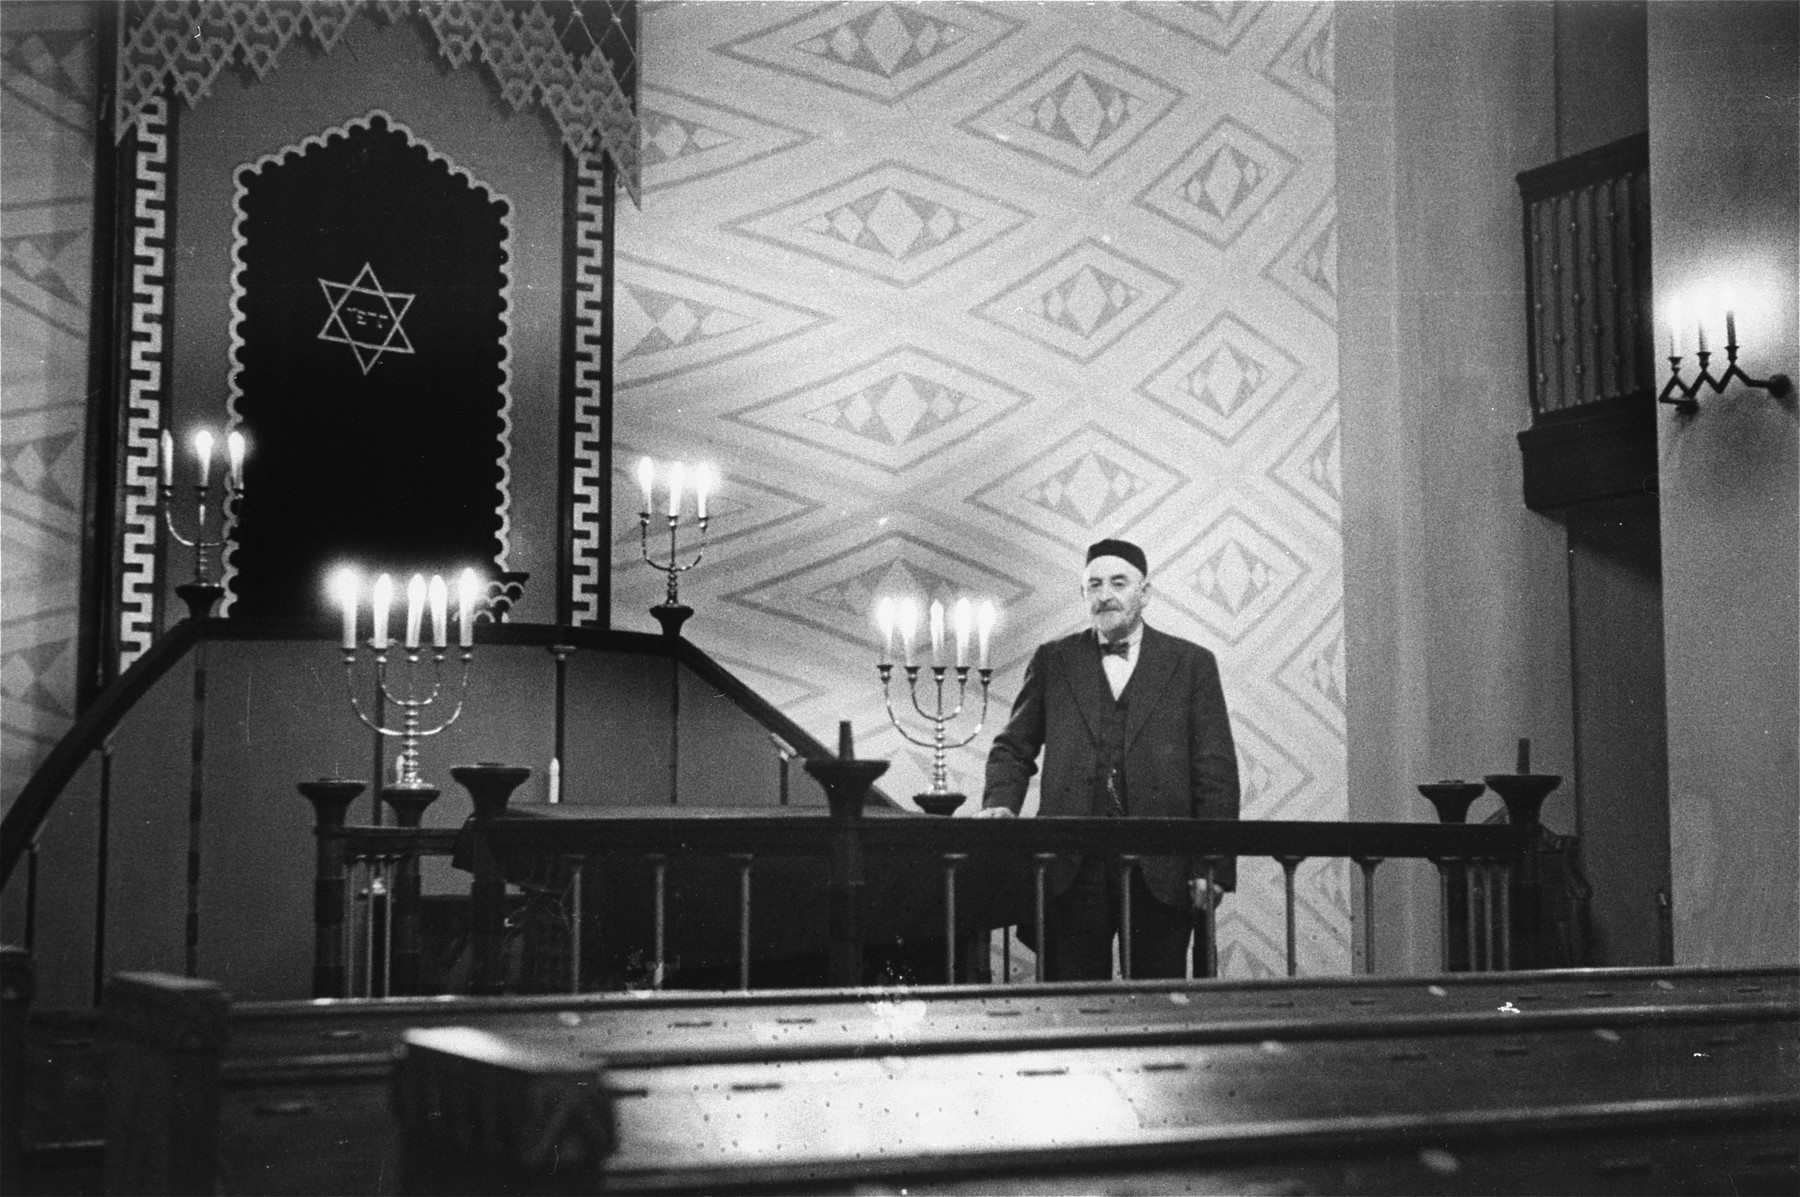 Portrait of Aron Mendelsohn, the donor's father, in the sanctuary of the synagogue in Trondheim, Norway.

Aron Mendelsohn was a clothing manufacturer in Trondheim, Norway, who was a prominent member of the local Jewish community.  He was later sent to the Falstad concentration camp.